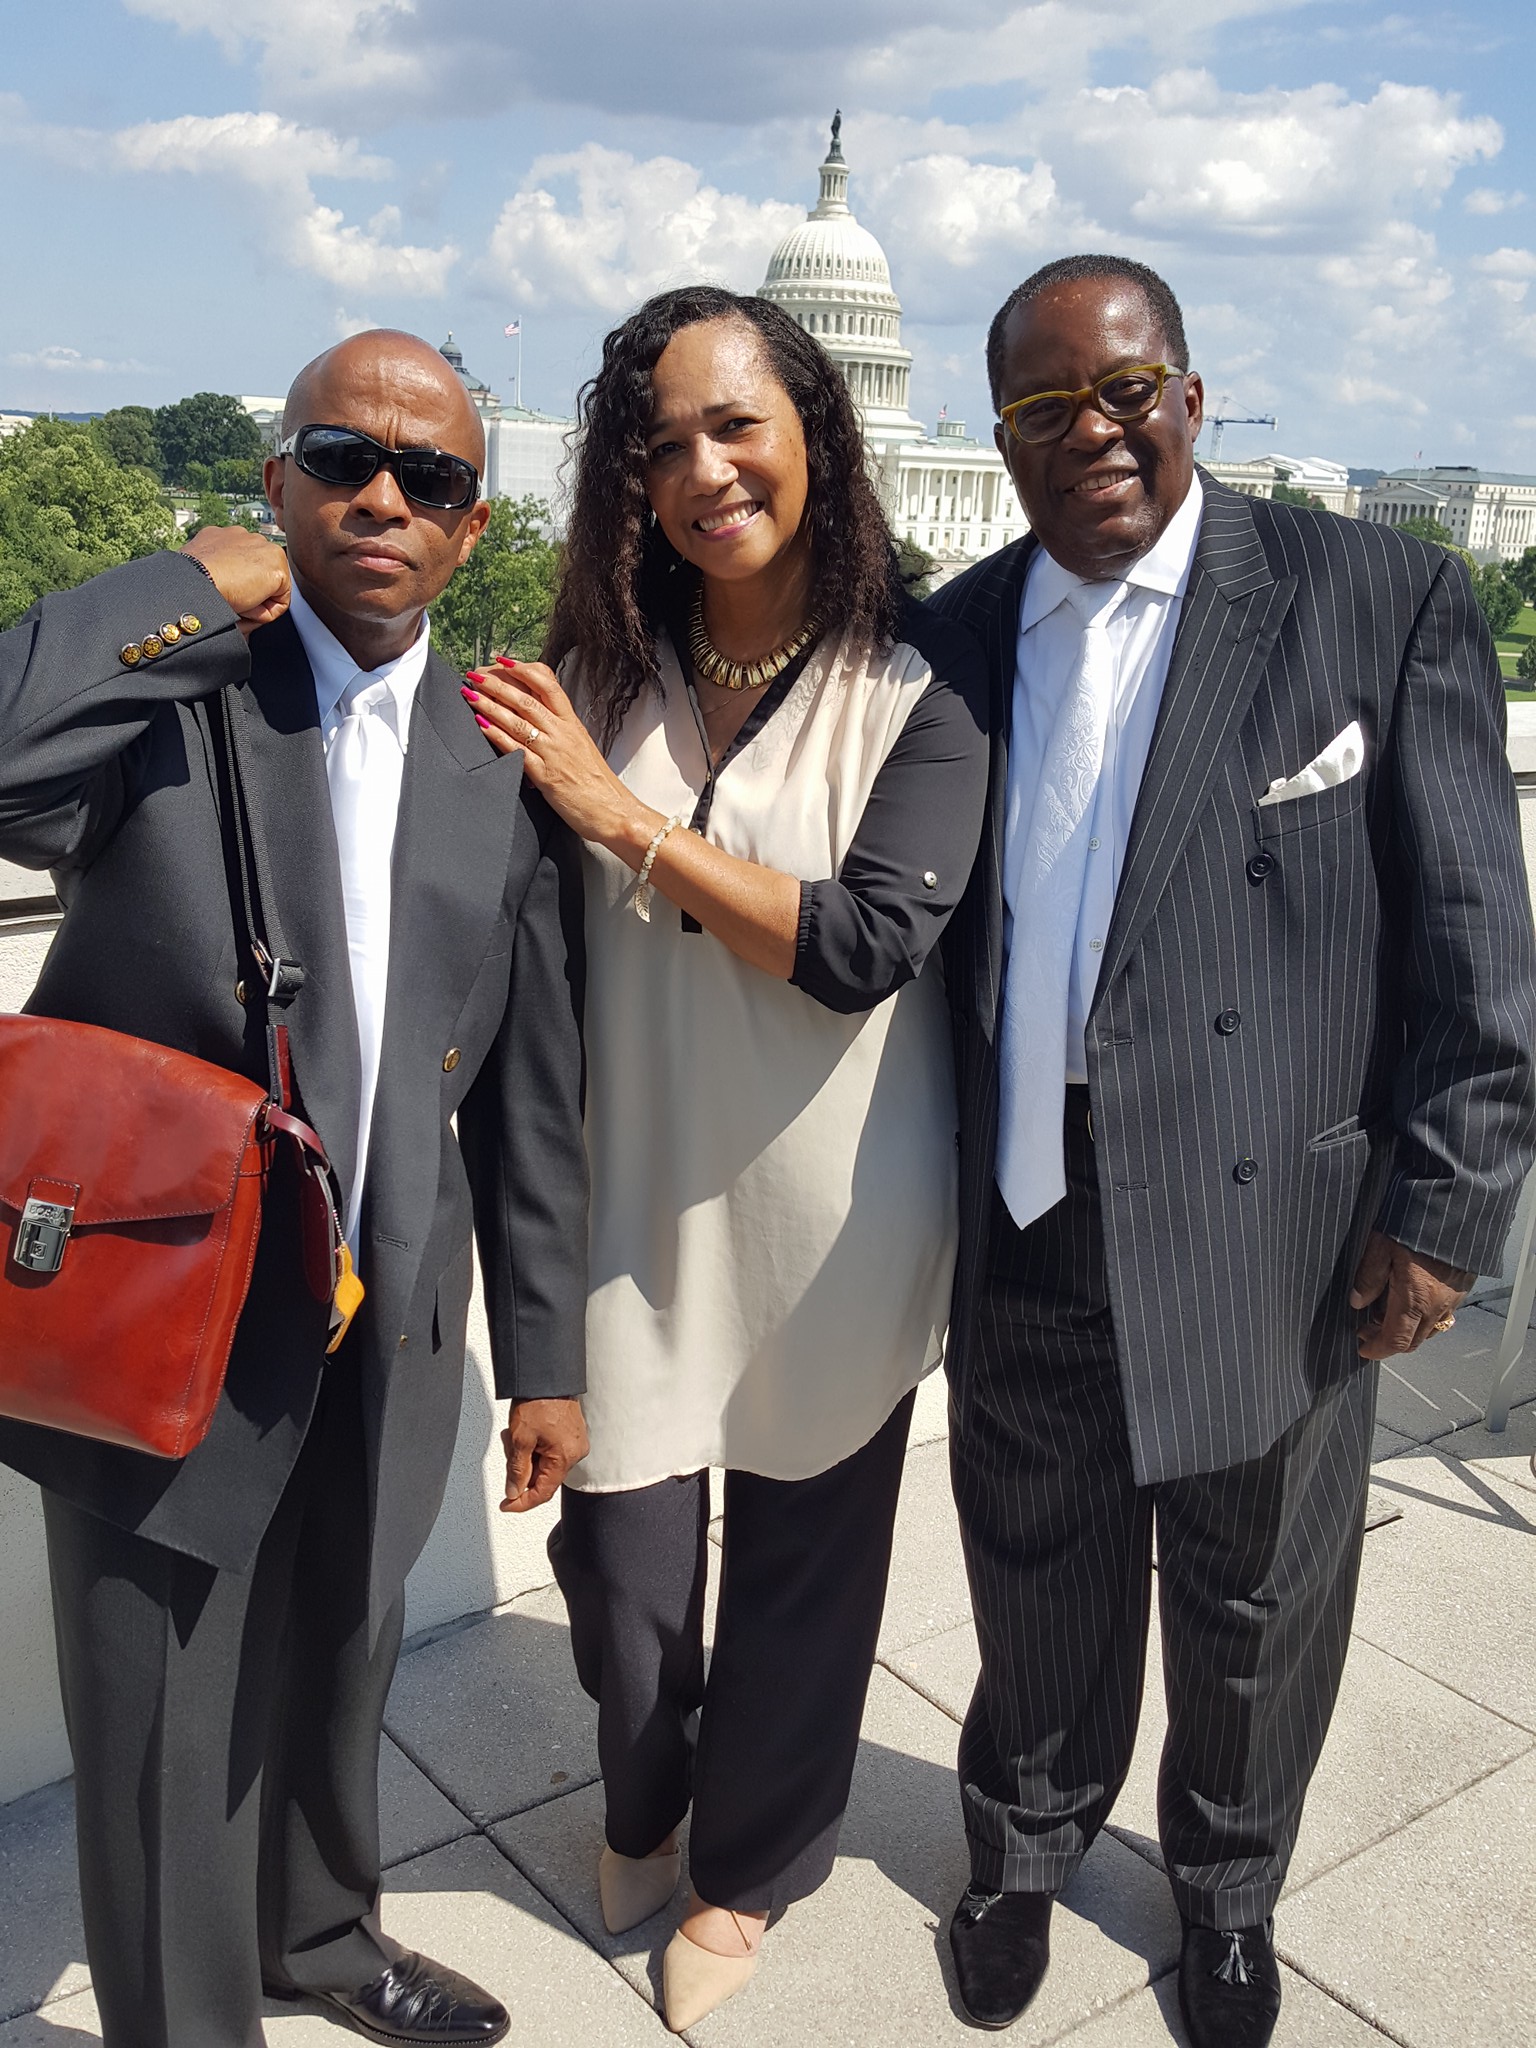 Johnny Long Playing Tenor Sax with Kenny Holmes (Guitar) and Denise Johnson (Drums) at the United States Capitol in Washington, DC